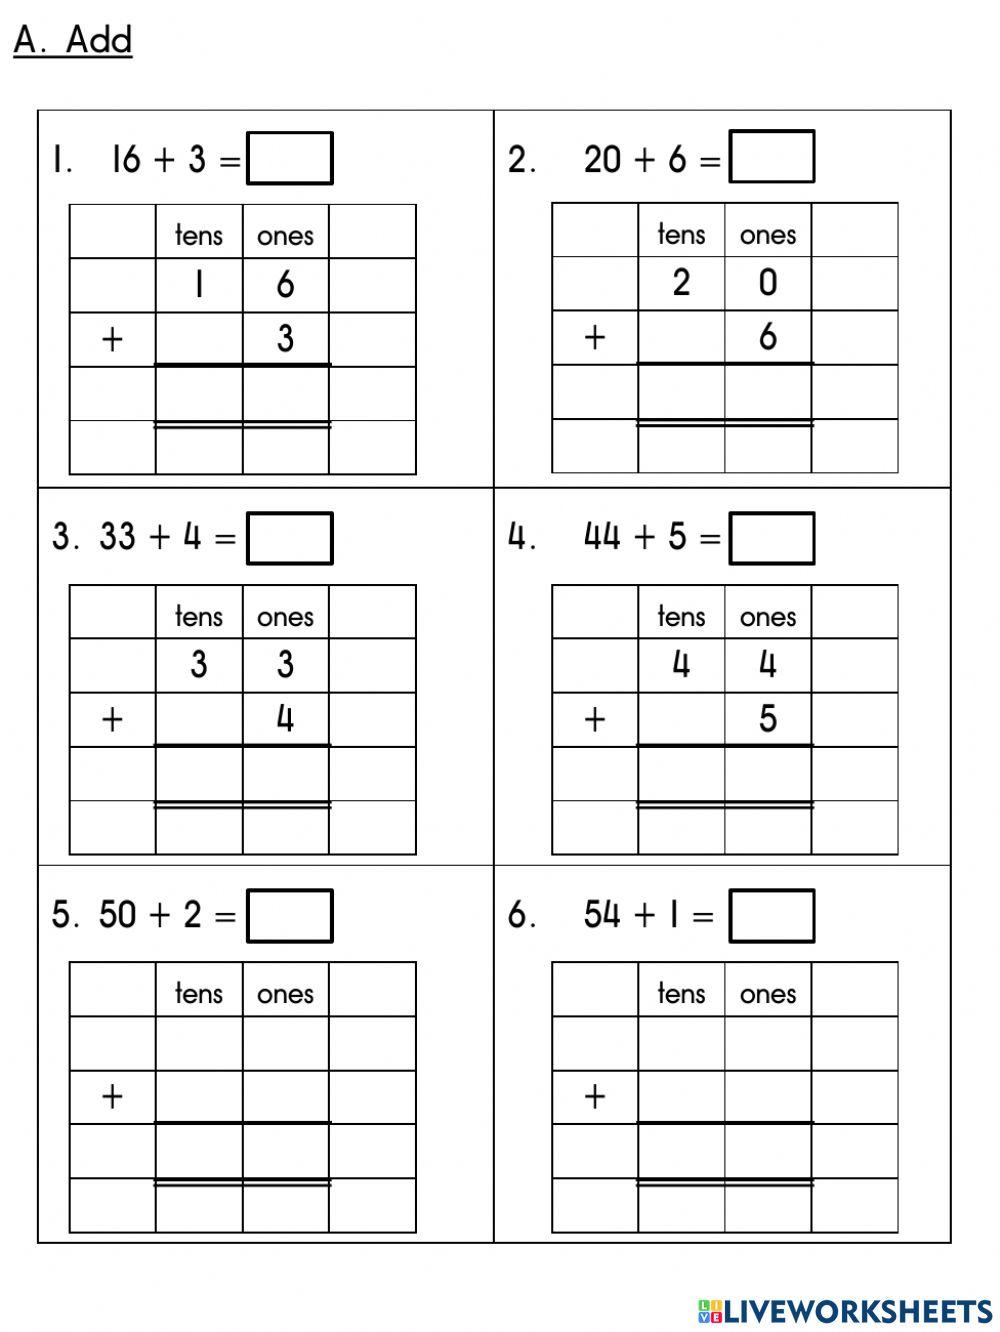 Addition within 50 and 100 worksheet | Live Worksheets